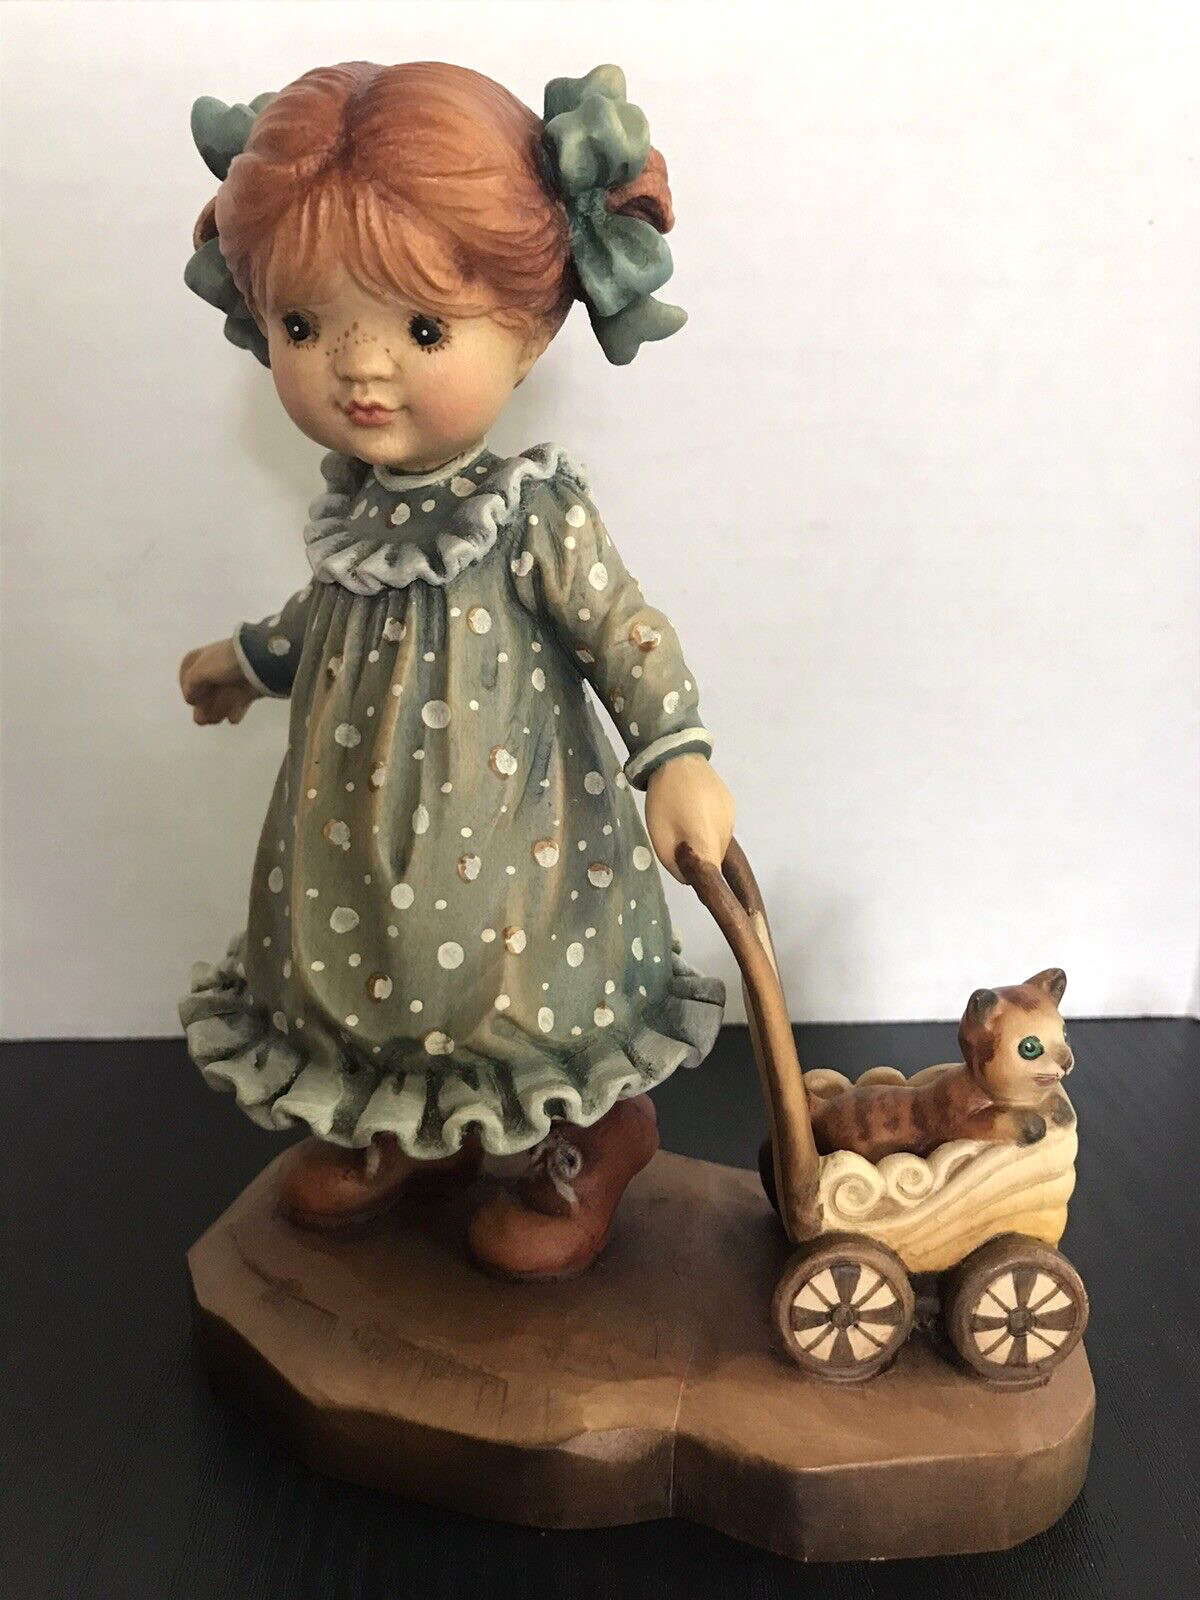 SARAH KAY ANRI VALENTINE PURRFECT DAY FIGURINE GIRL WITH CAT IN WAGON 6  1/2” LE